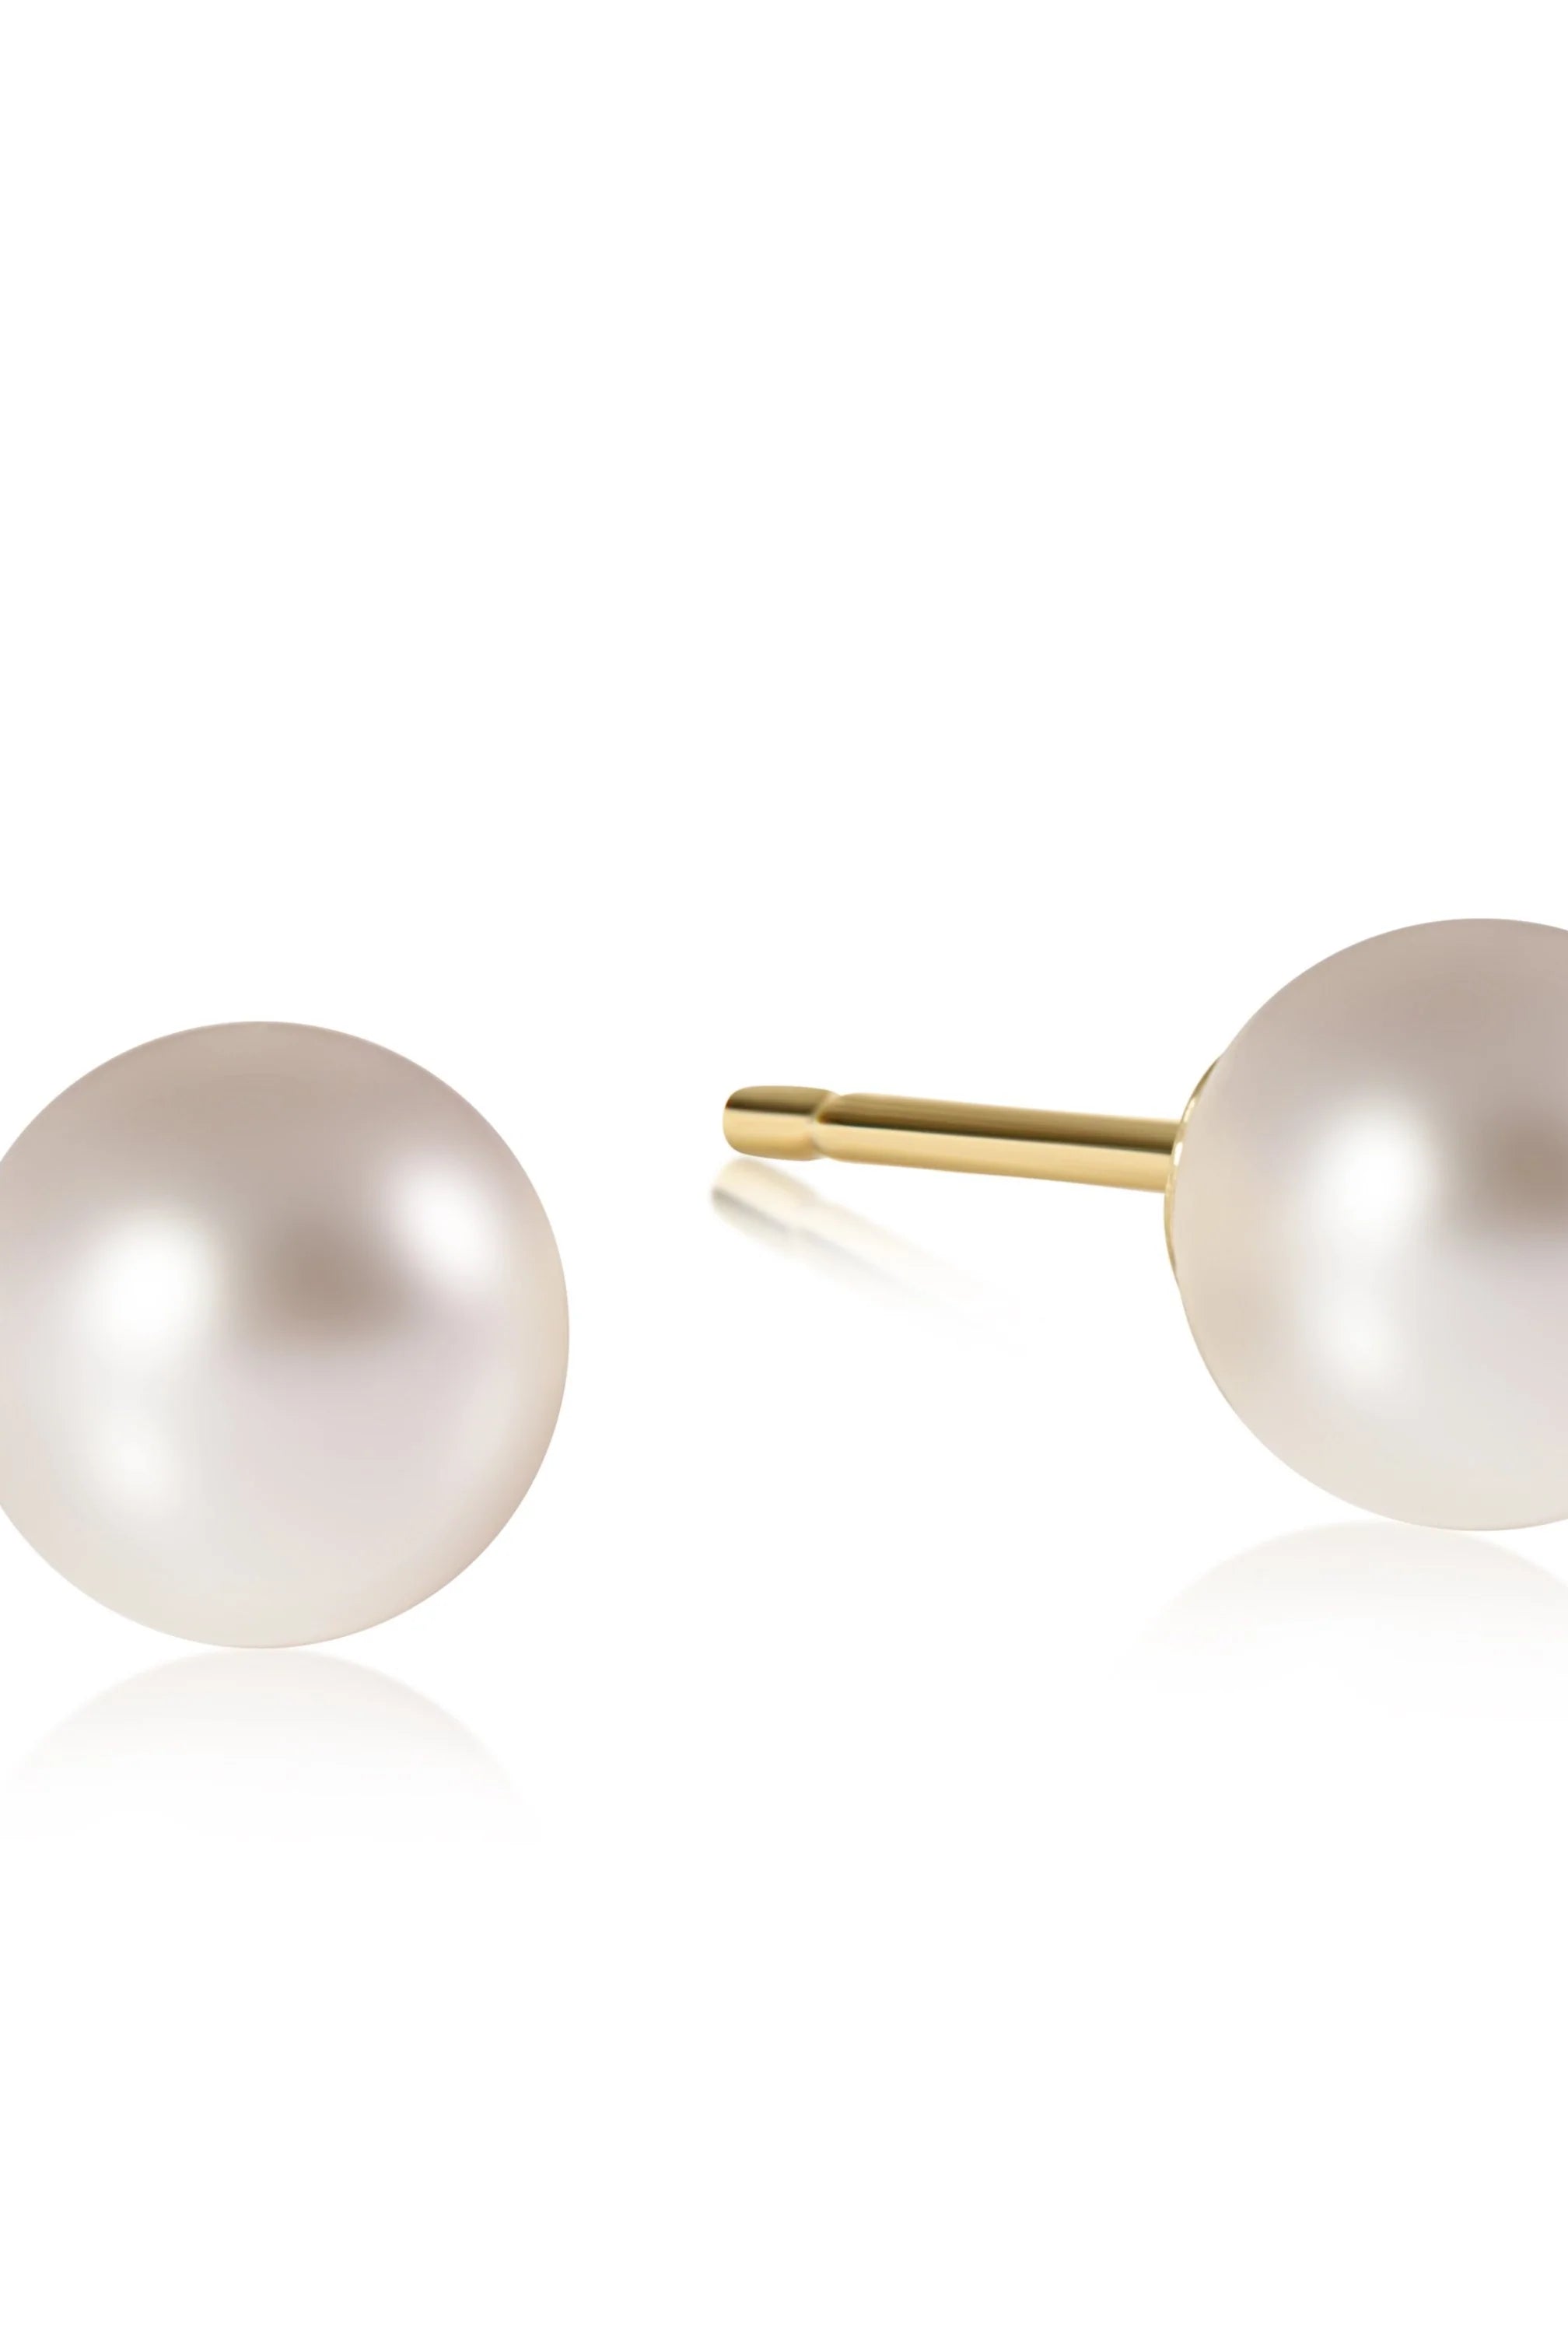 10mm Pearl Stud-Earrings-The Lovely Closet-The Lovely Closet, Women's Fashion Boutique in Alexandria, KY